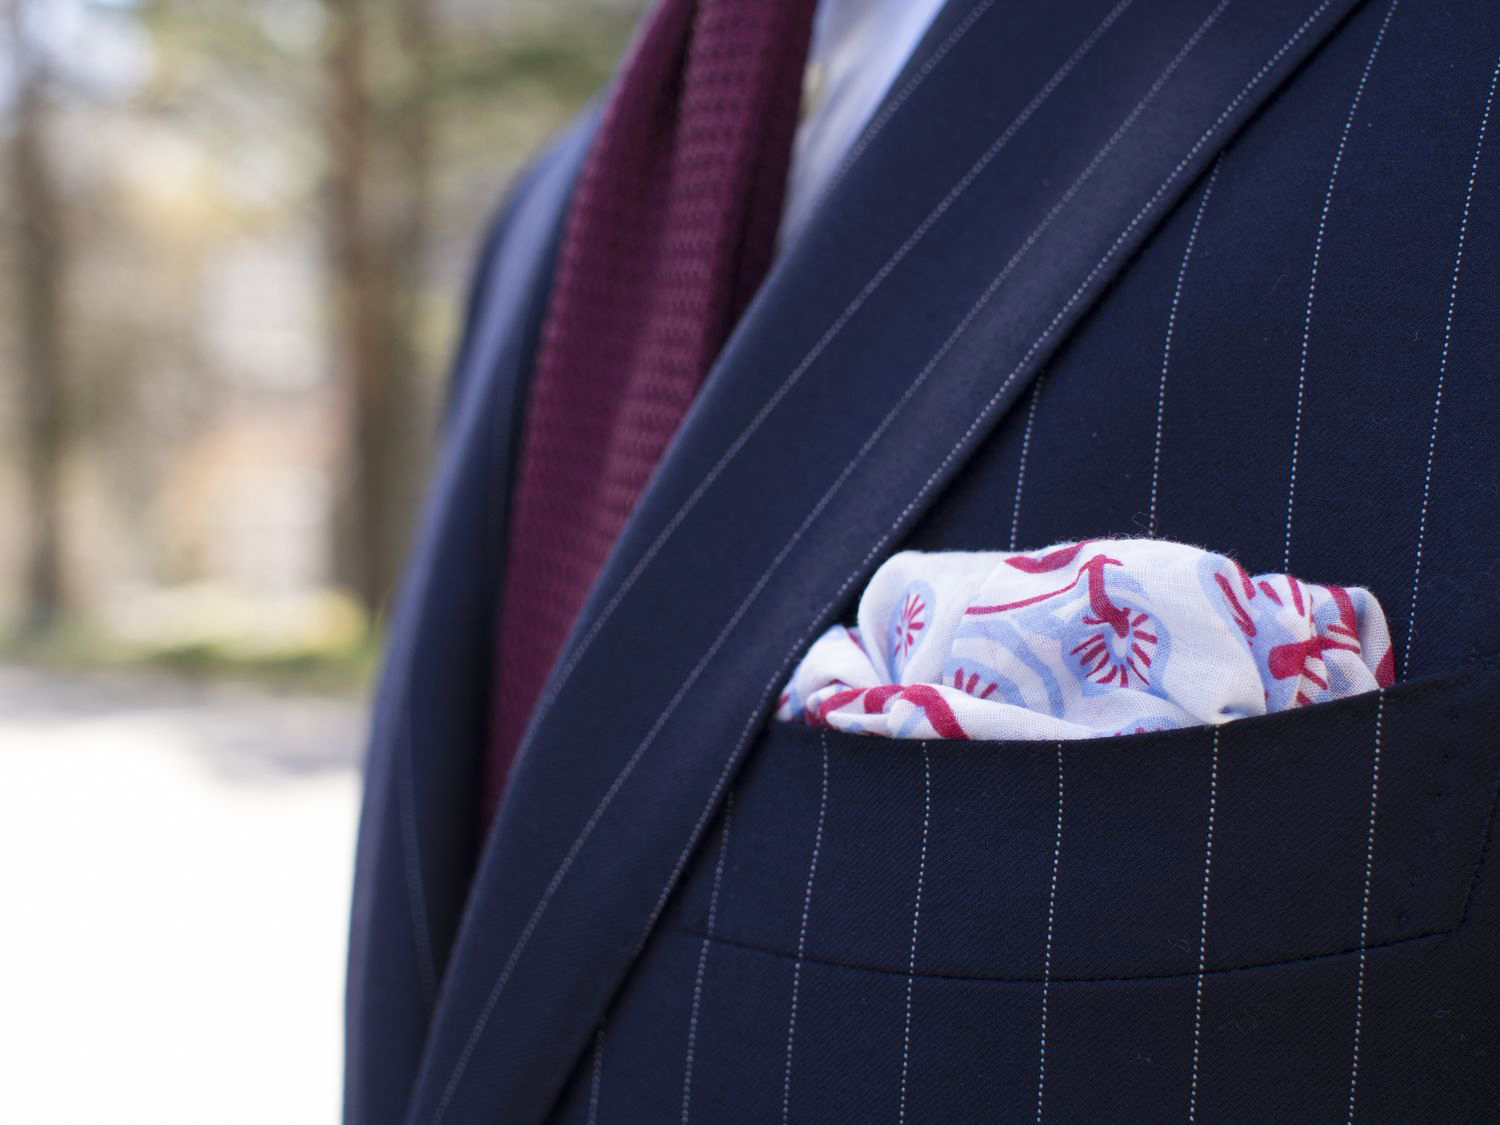 wearing a burgundy tie and floral pocket square